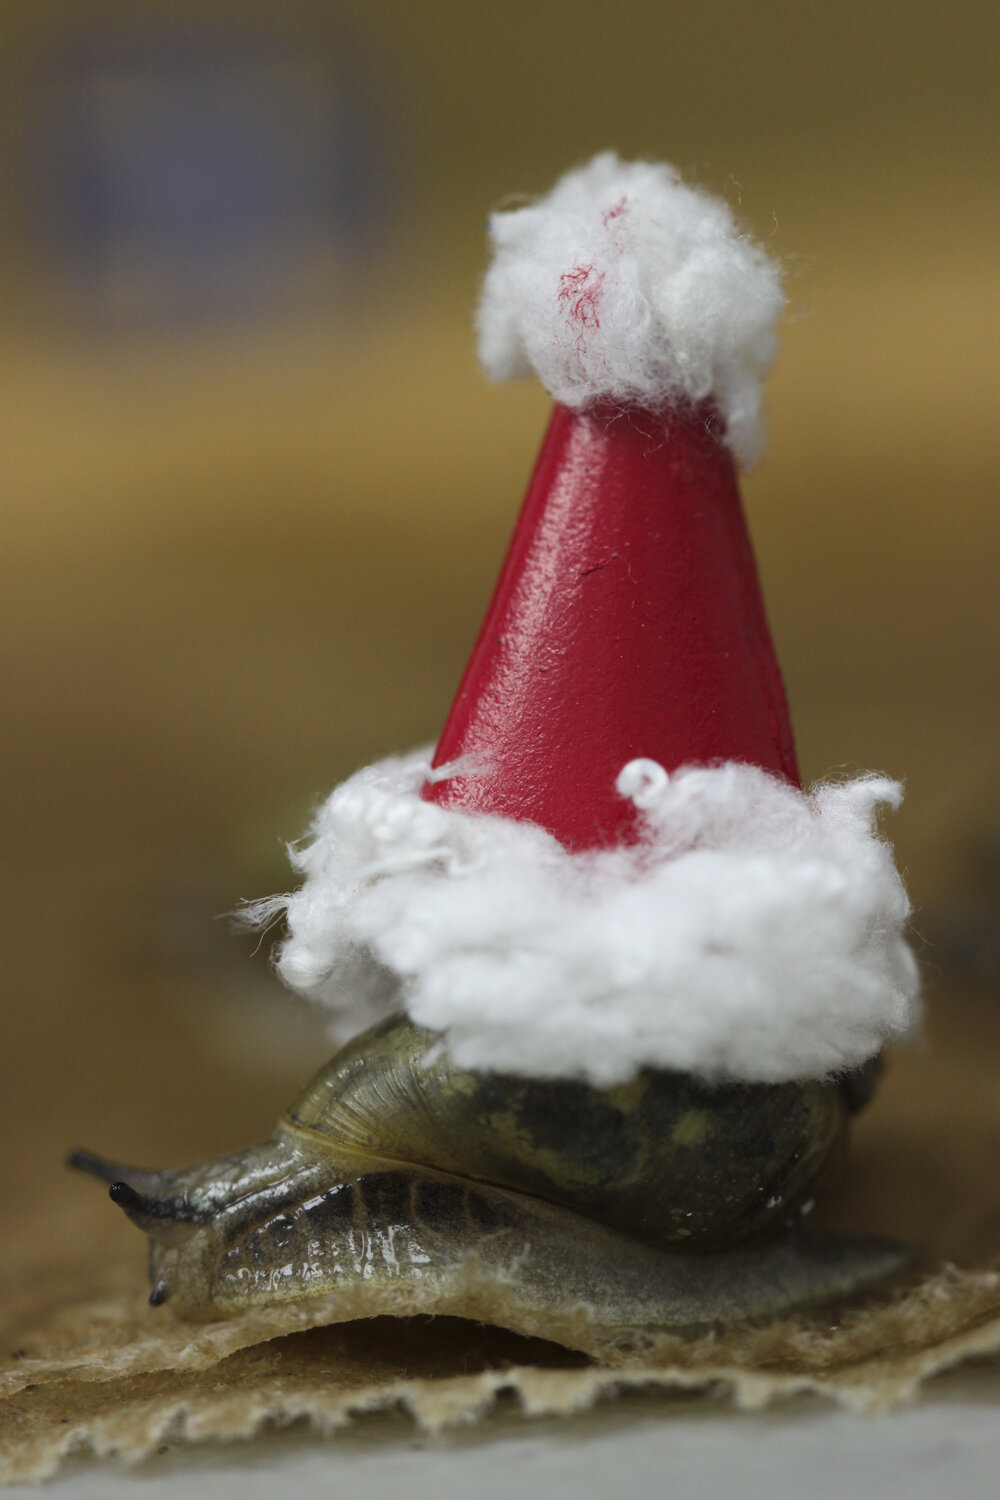  A snail with a Santa hat moves around the holiday diorama that was created by Ashton Yost. The festive snails are used by the Facebook Group Snailblazers to promote Chitteanango snail awareness and conservation online. 